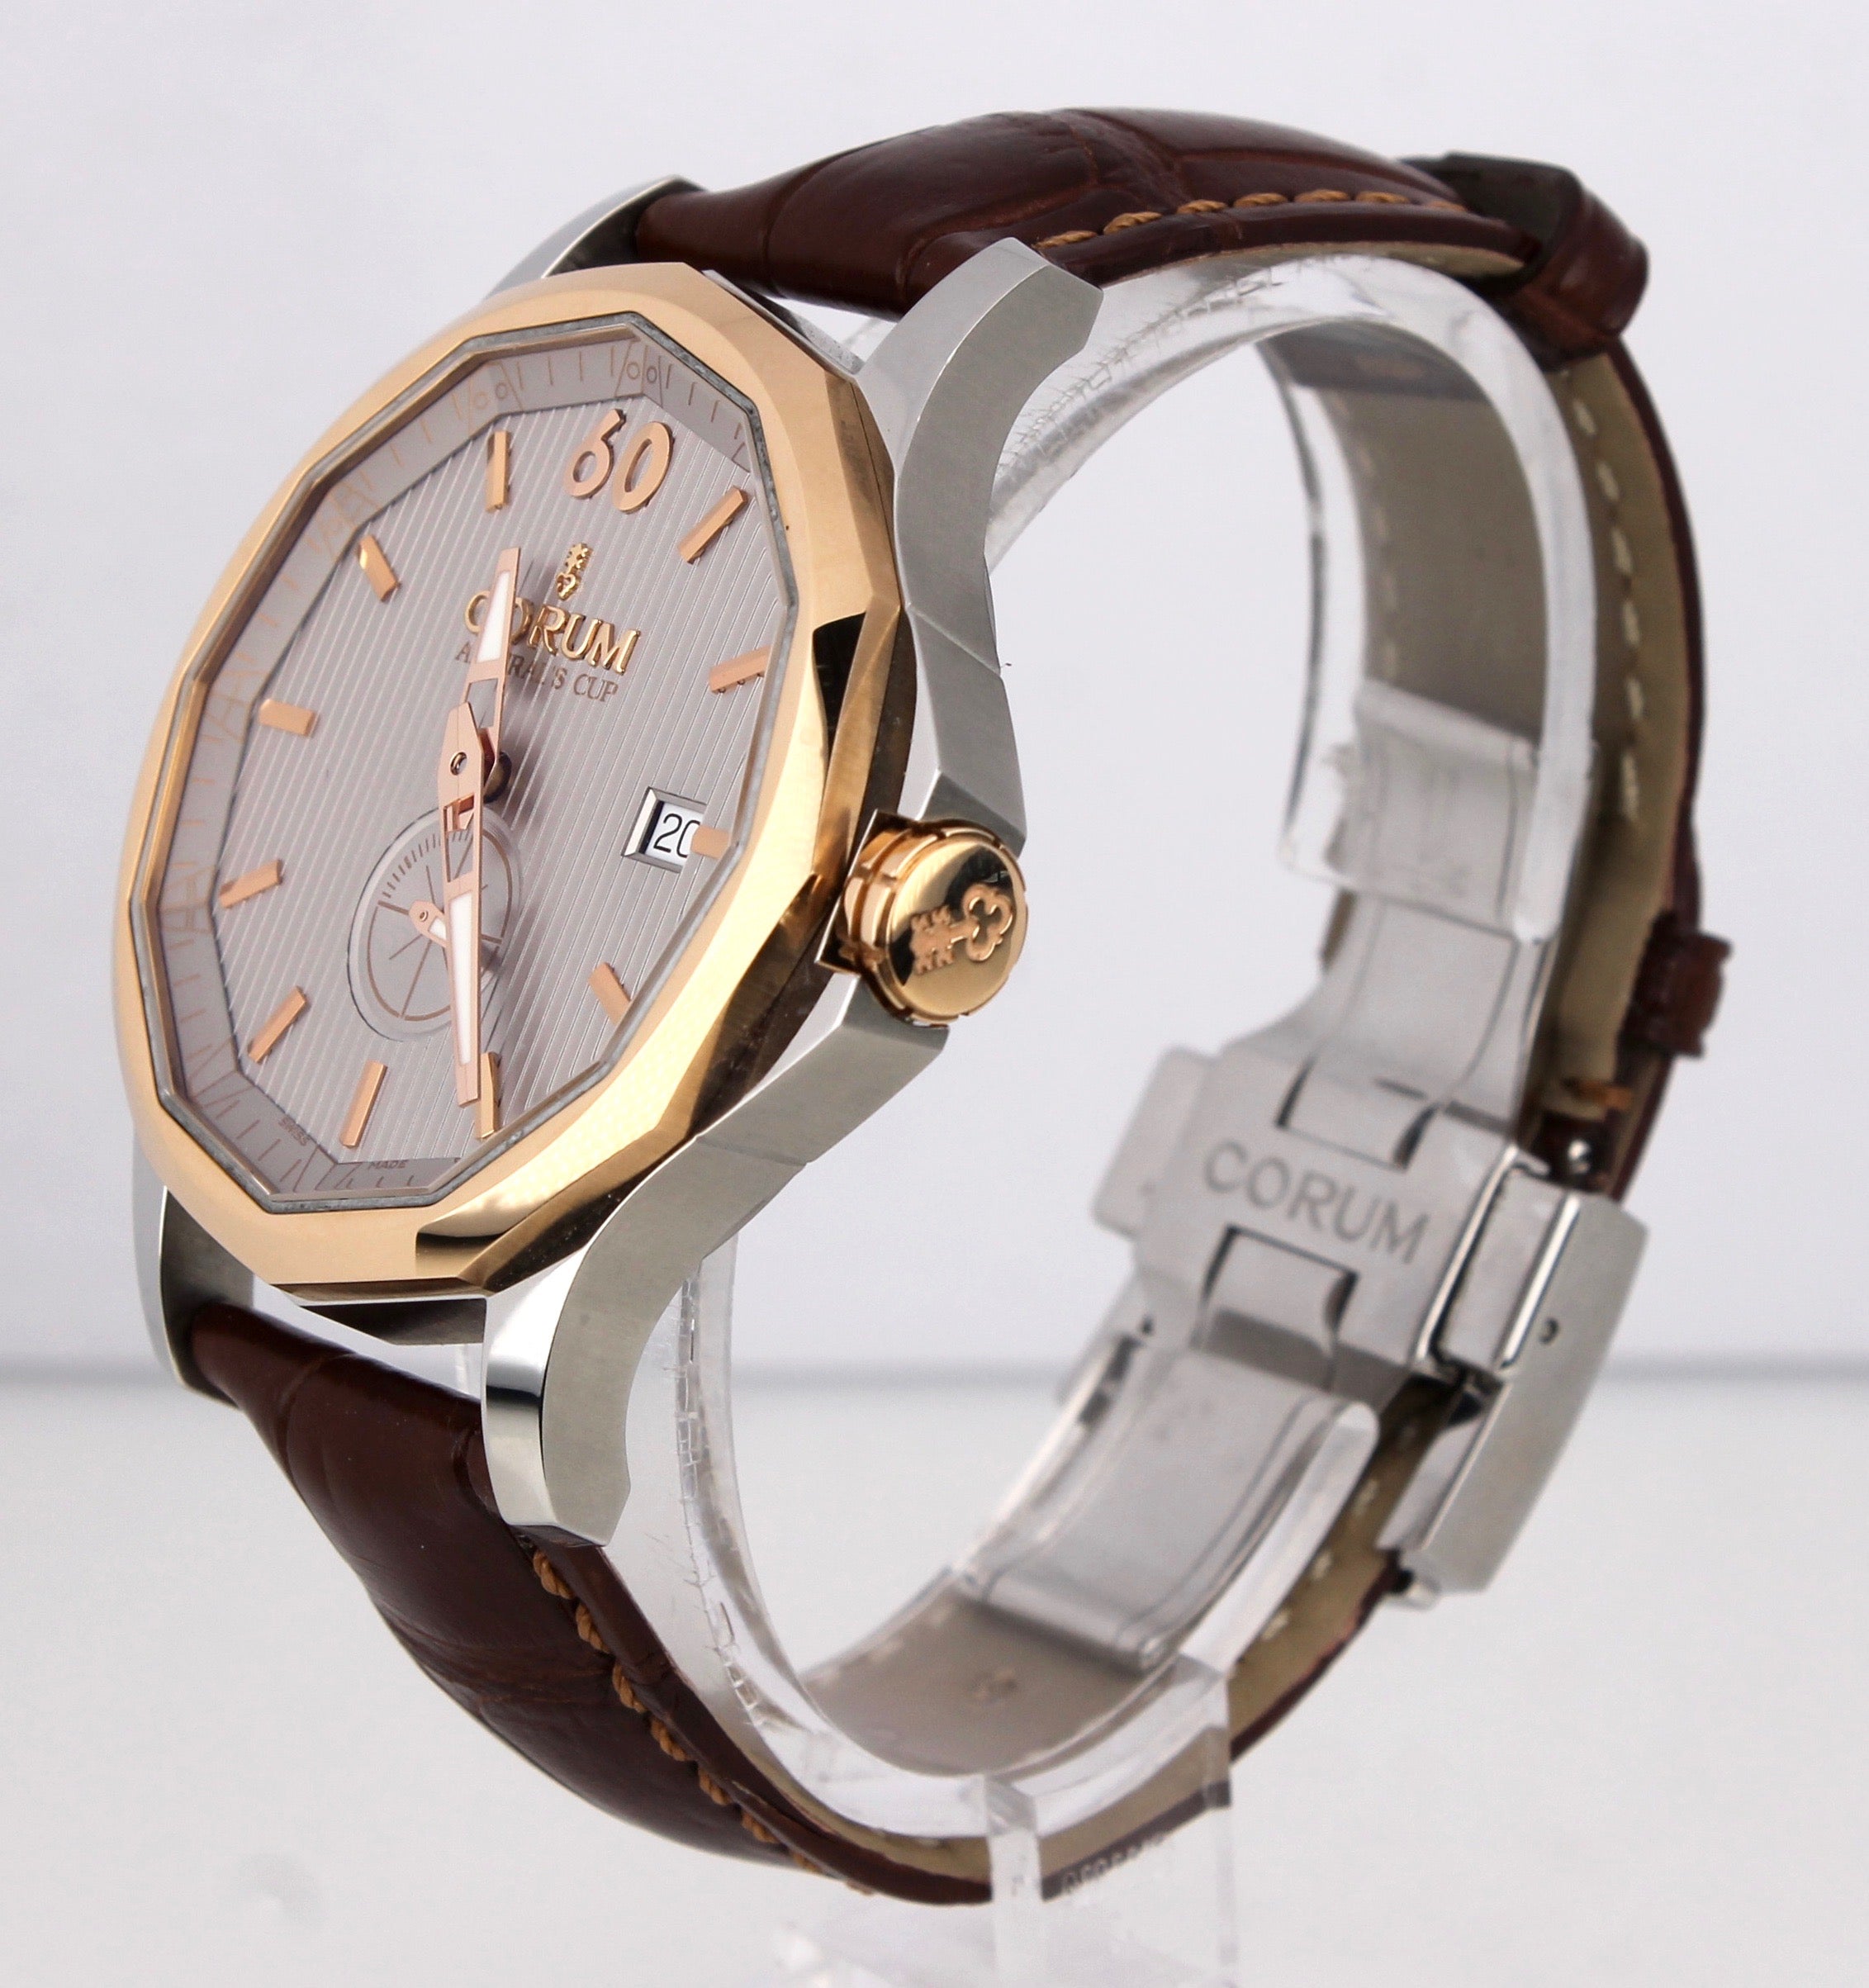 Corum Admiral's Cup Legend 42mm Two-Tone Rose Gold Watch 395.101.24/0F62 FH11